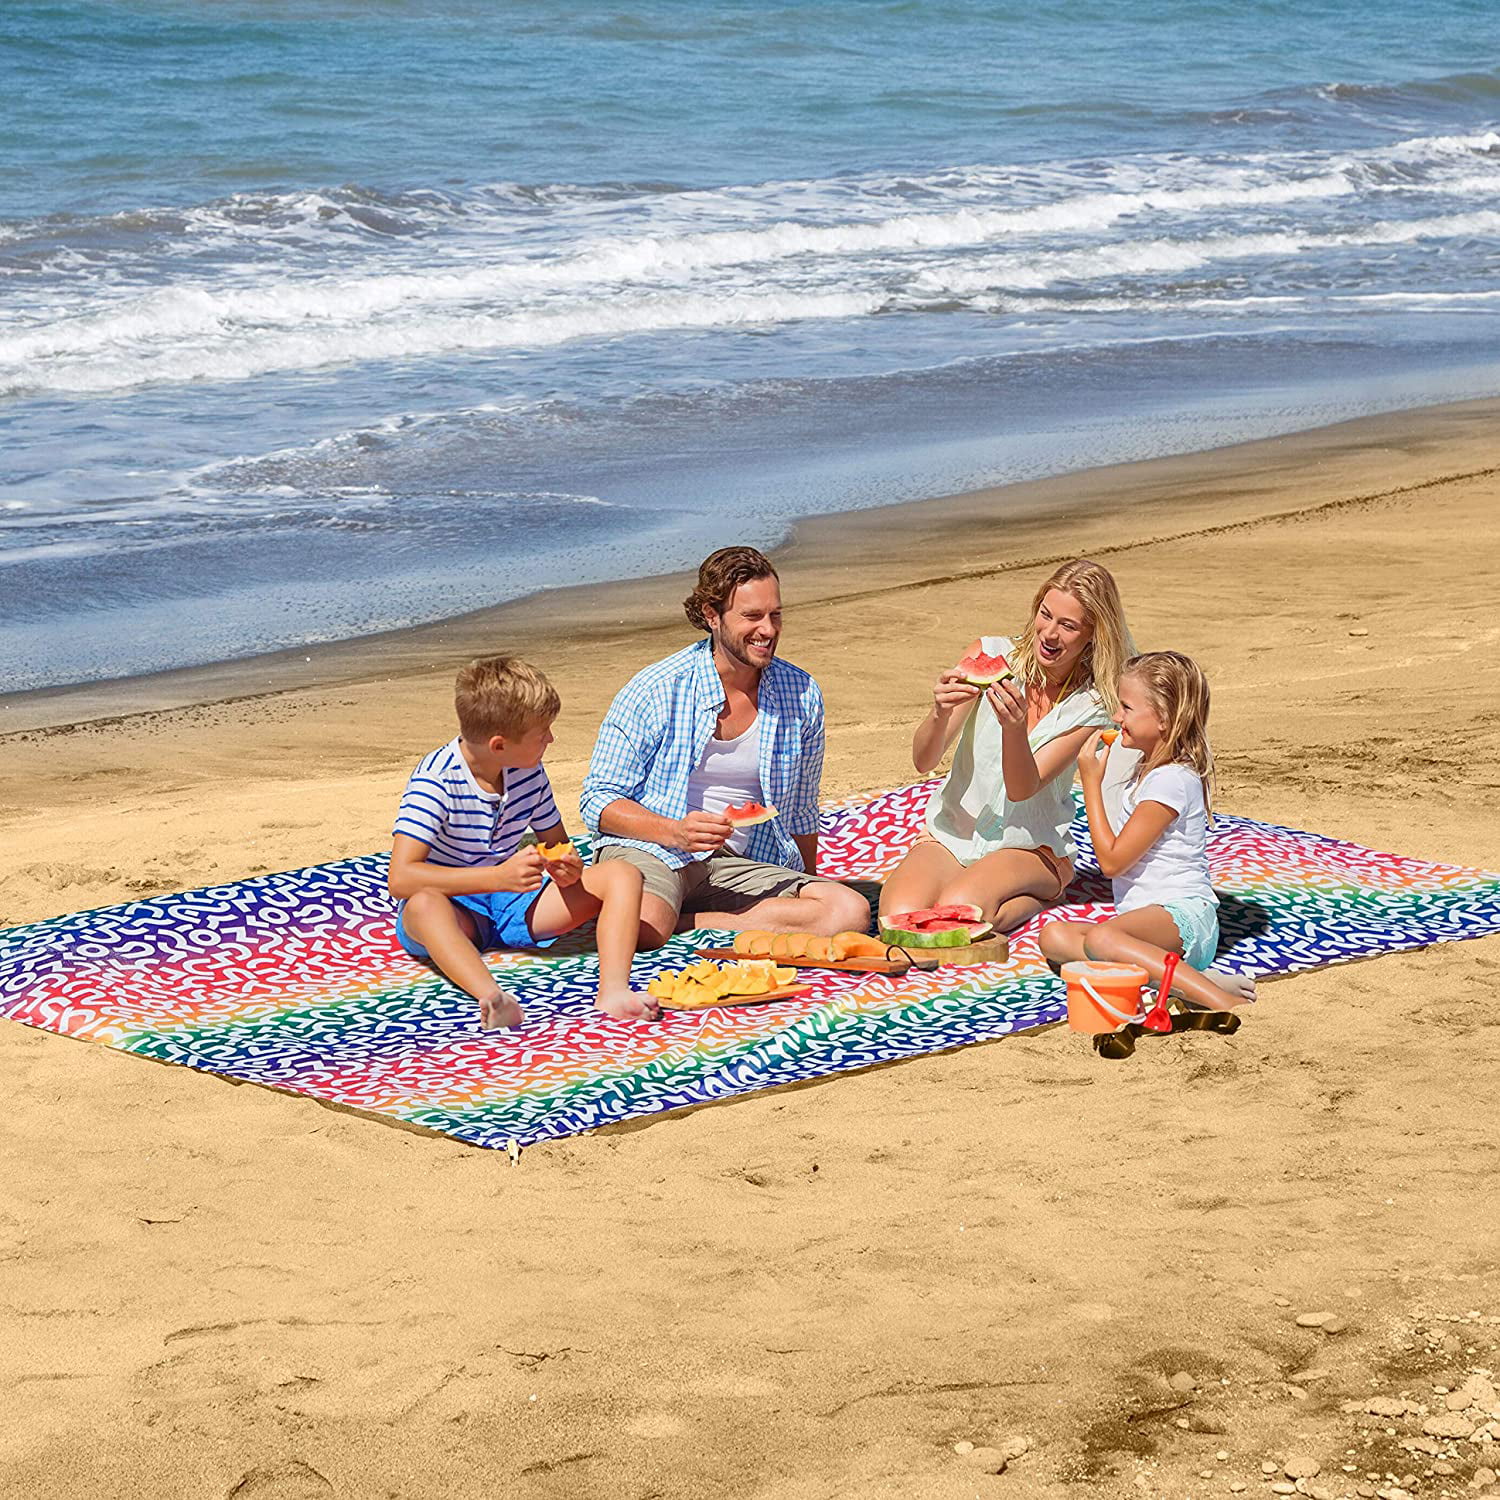 UrbanEco Outdoors Lightweight Beach Blanket Double Anchored for Fun Leisure Beach Blanket With Stake Pouch and Plastic Stakes Durable Sand Beach Mat Waterproof Sandproof Oversized 107 x 77